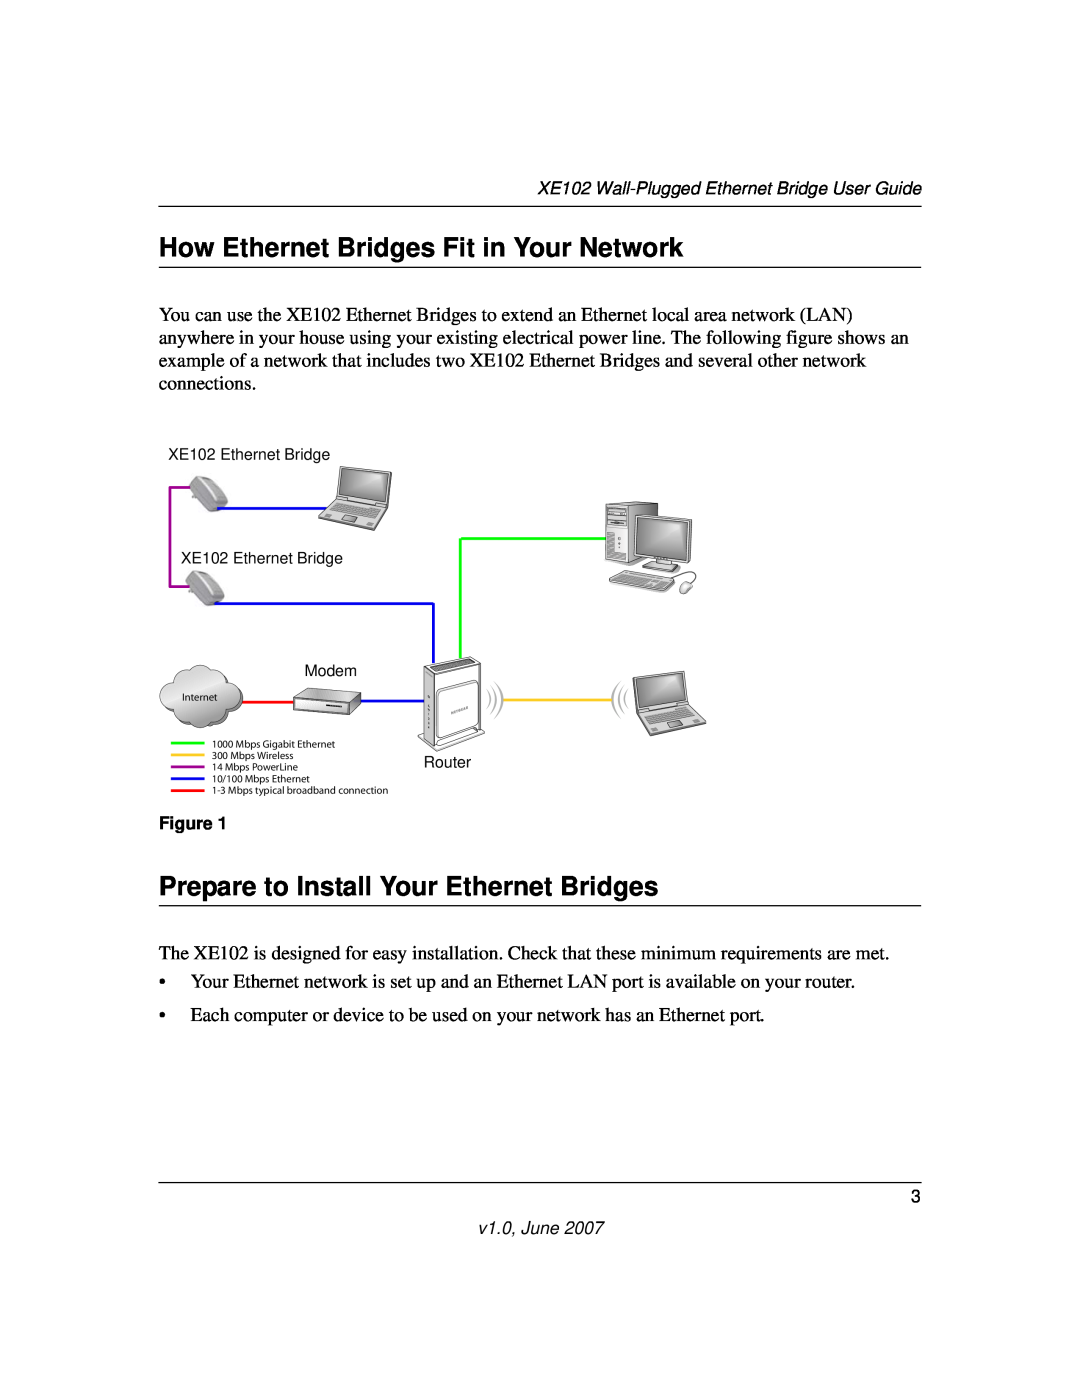 NETGEAR XE102 manual How Ethernet Bridges Fit in Your Network, Prepare to Install Your Ethernet Bridges 